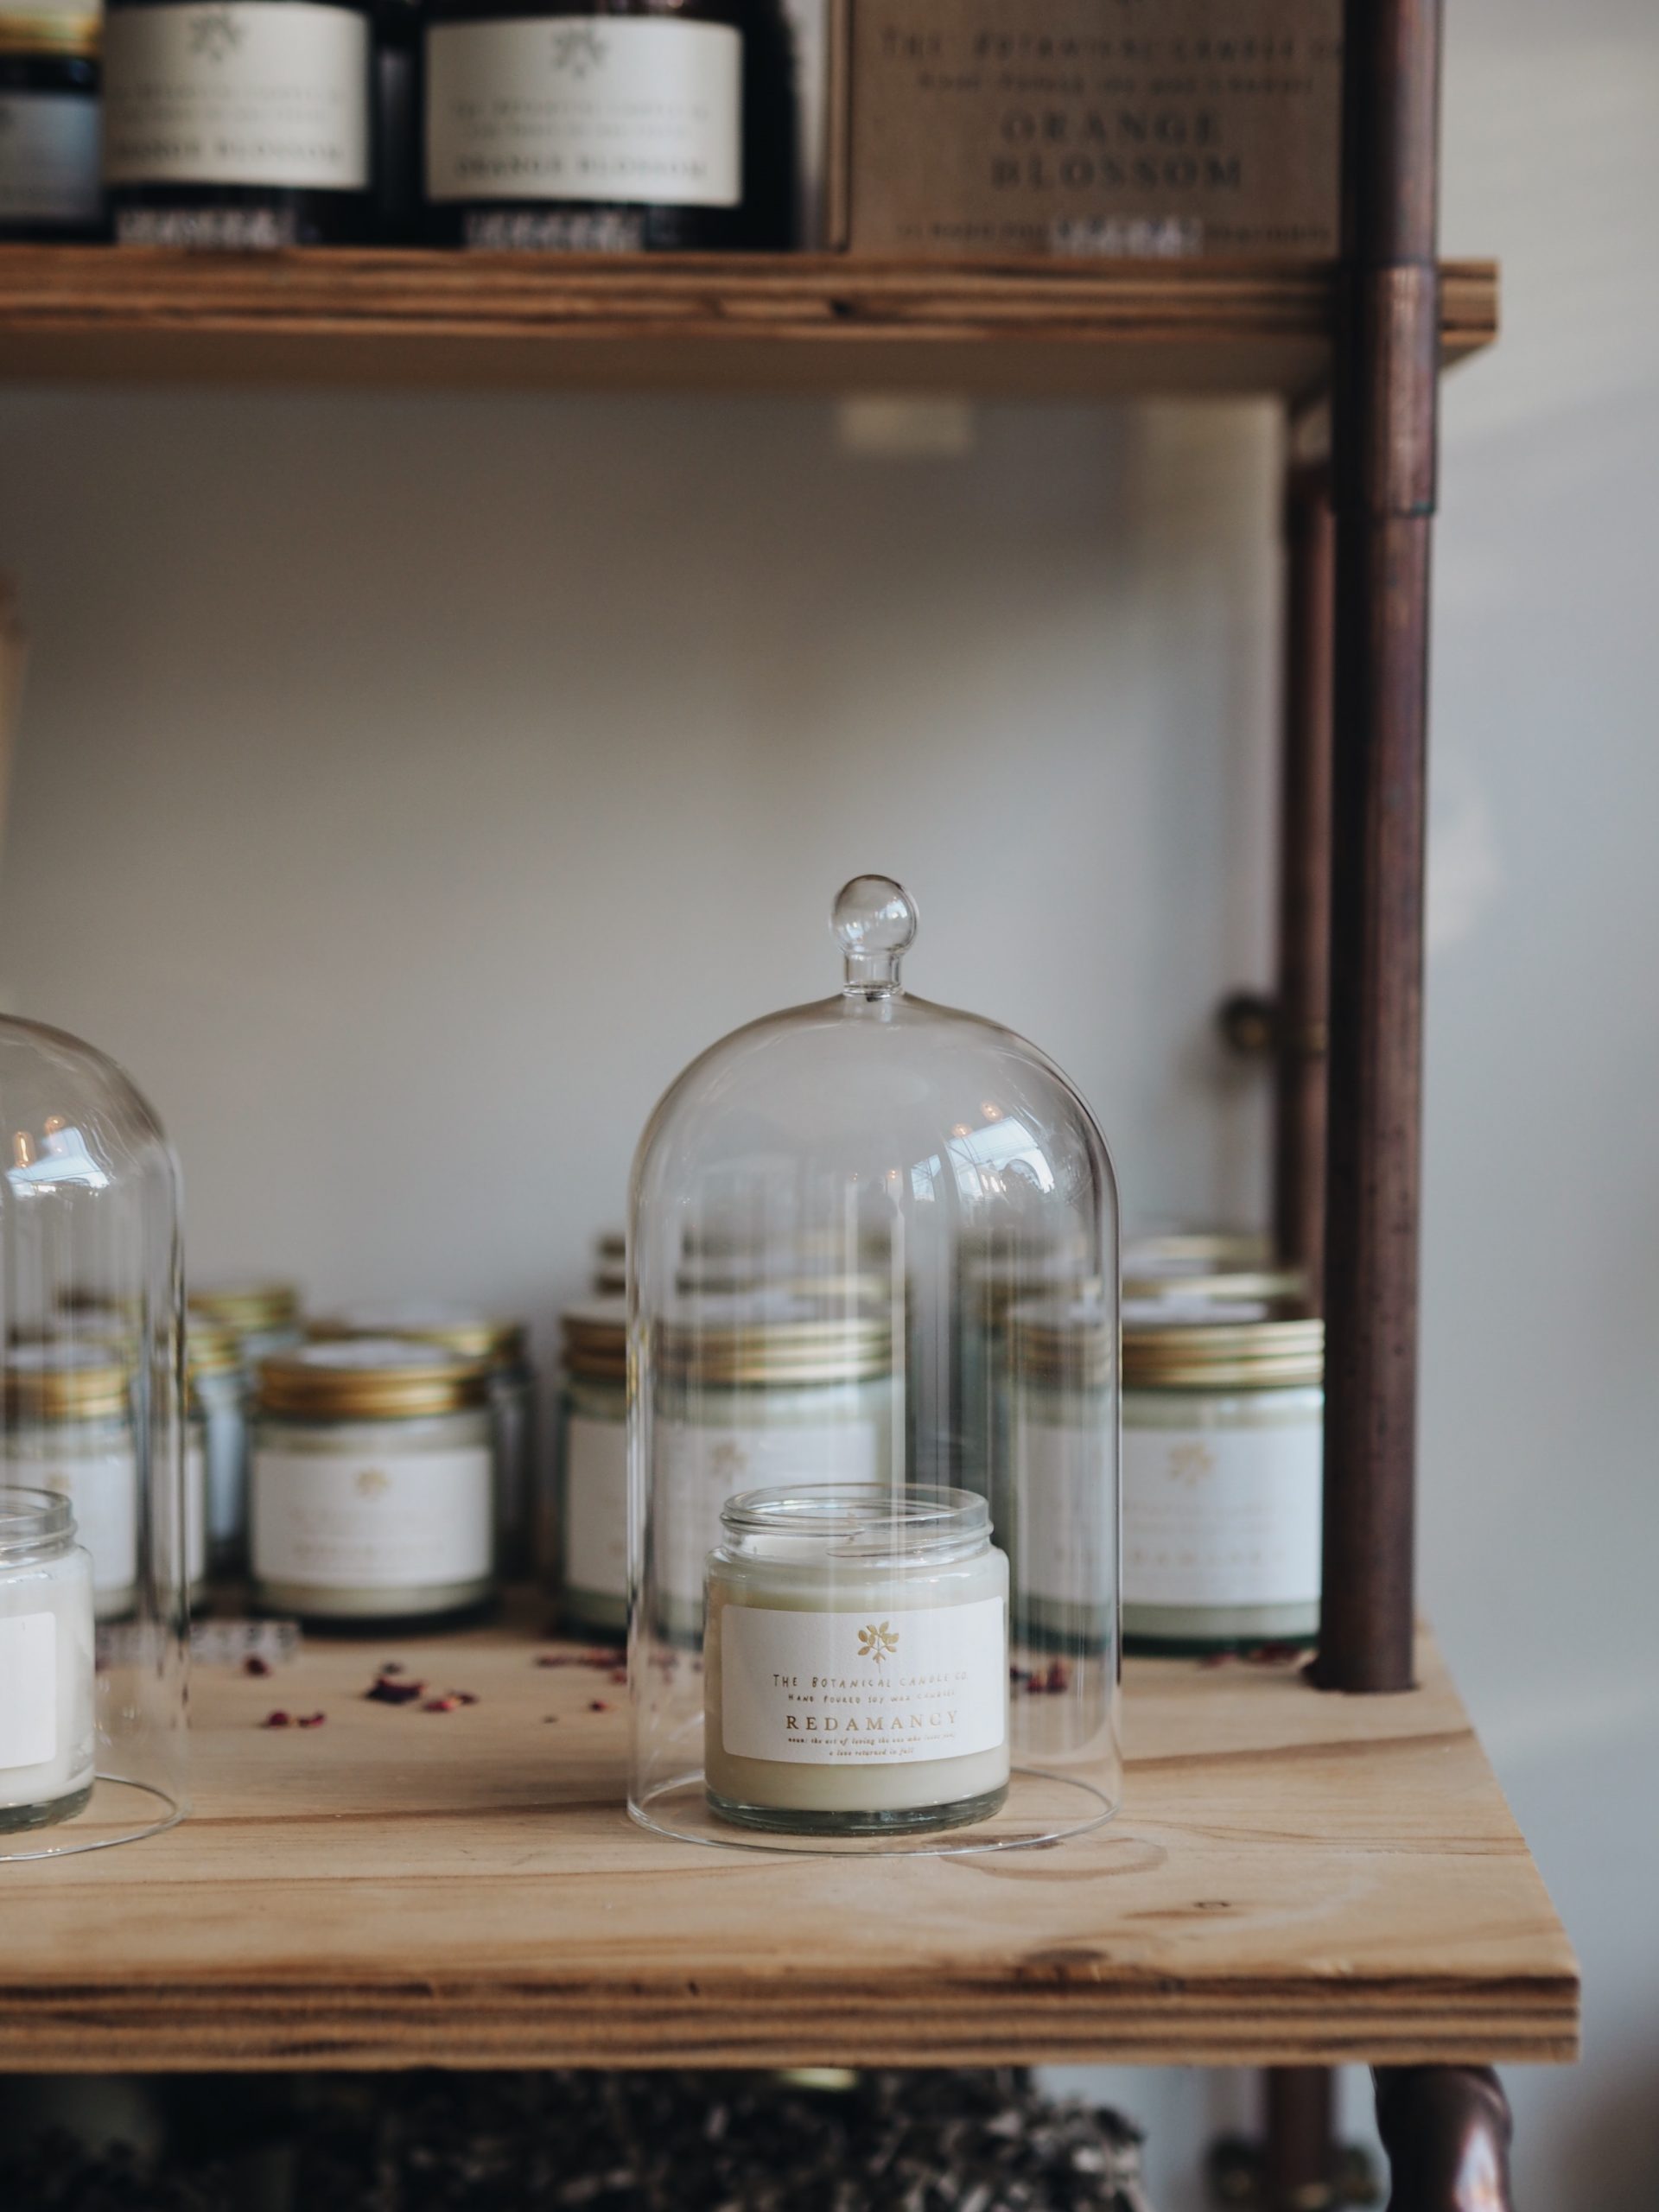 Plant based candle inside dome at The Botanical Candle Co. in Shaftesbury, Dorset